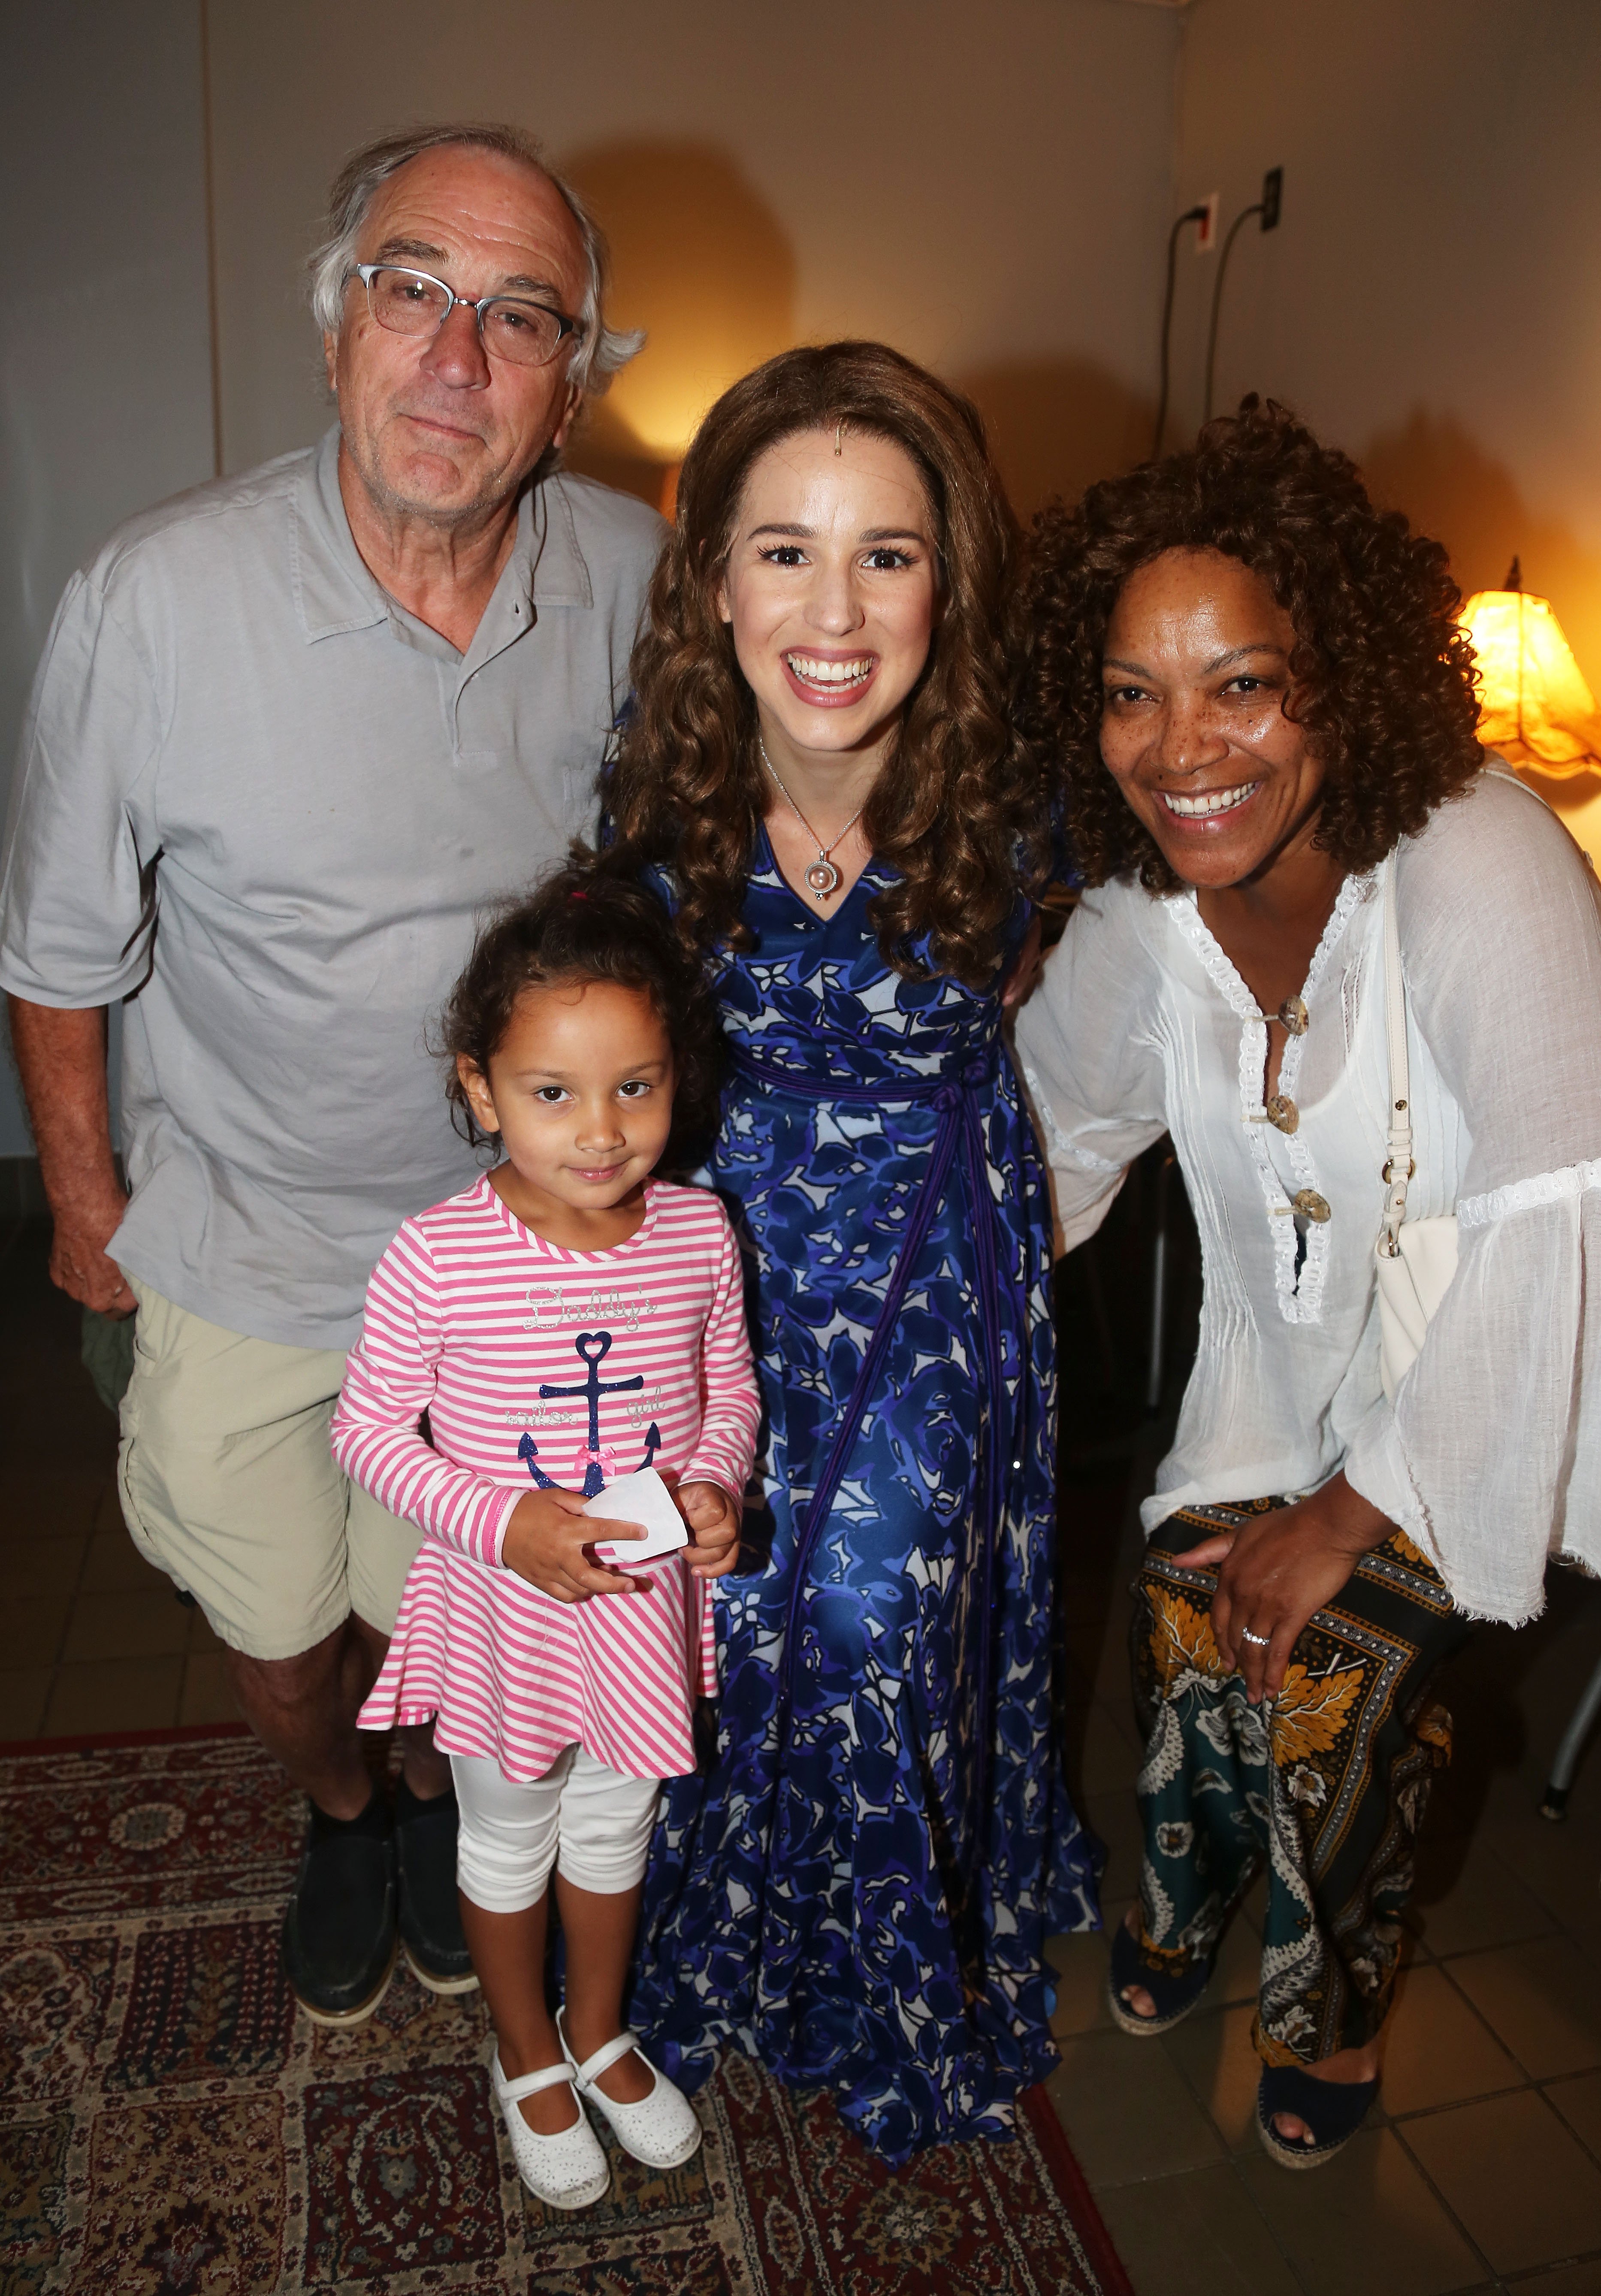 Actor Robert De Niro, daughter Helen Grace, Chilina Kennedy as "Carole King" and actress Grace Hightower on September 2, 2015, in New York City. | Source: Getty Images